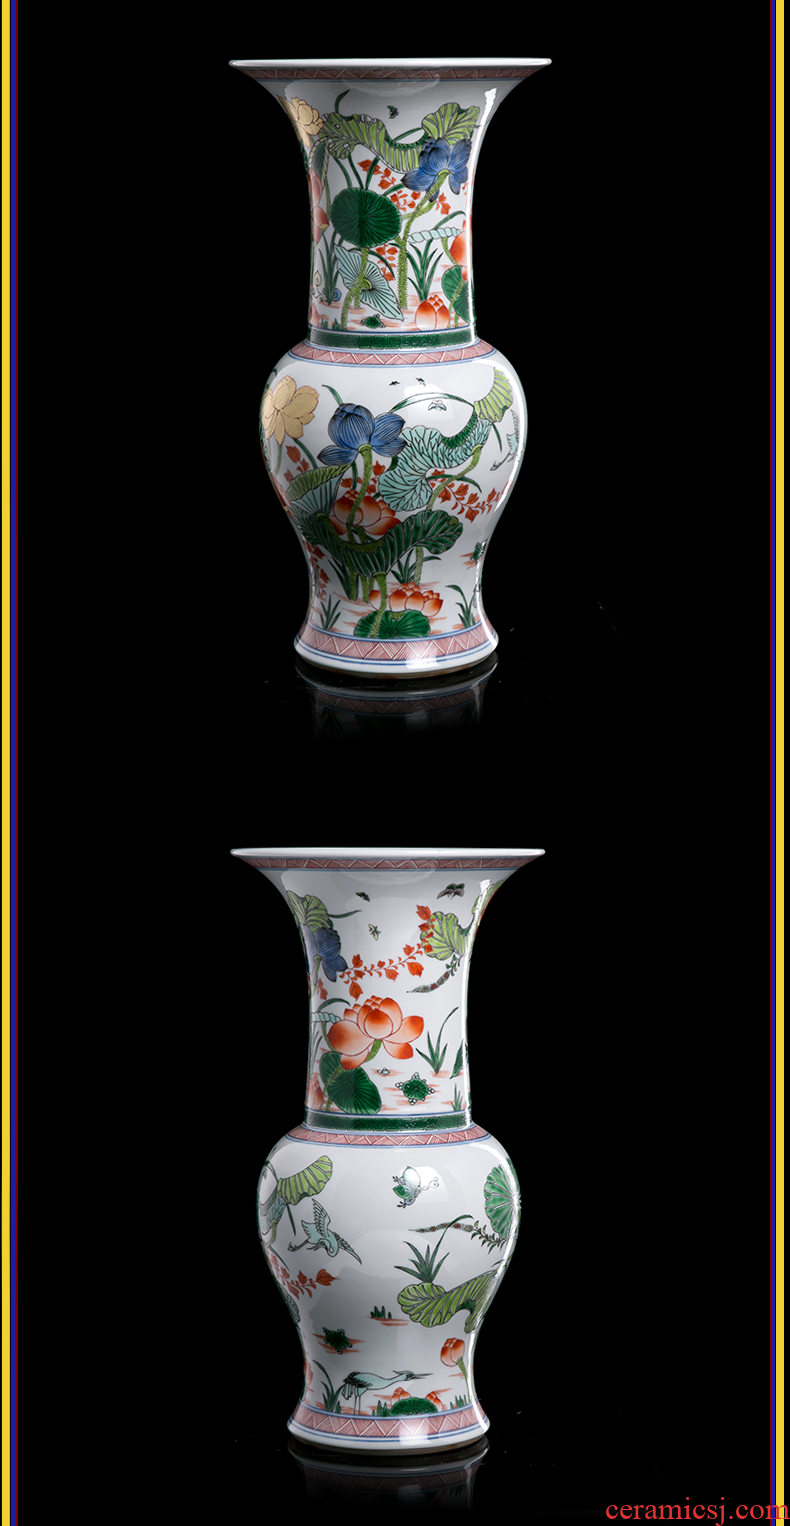 Better sealed kiln home furnishing articles jingdezhen ceramic sitting room adornment colorful lotus PND tail-on wide mouth antique vase